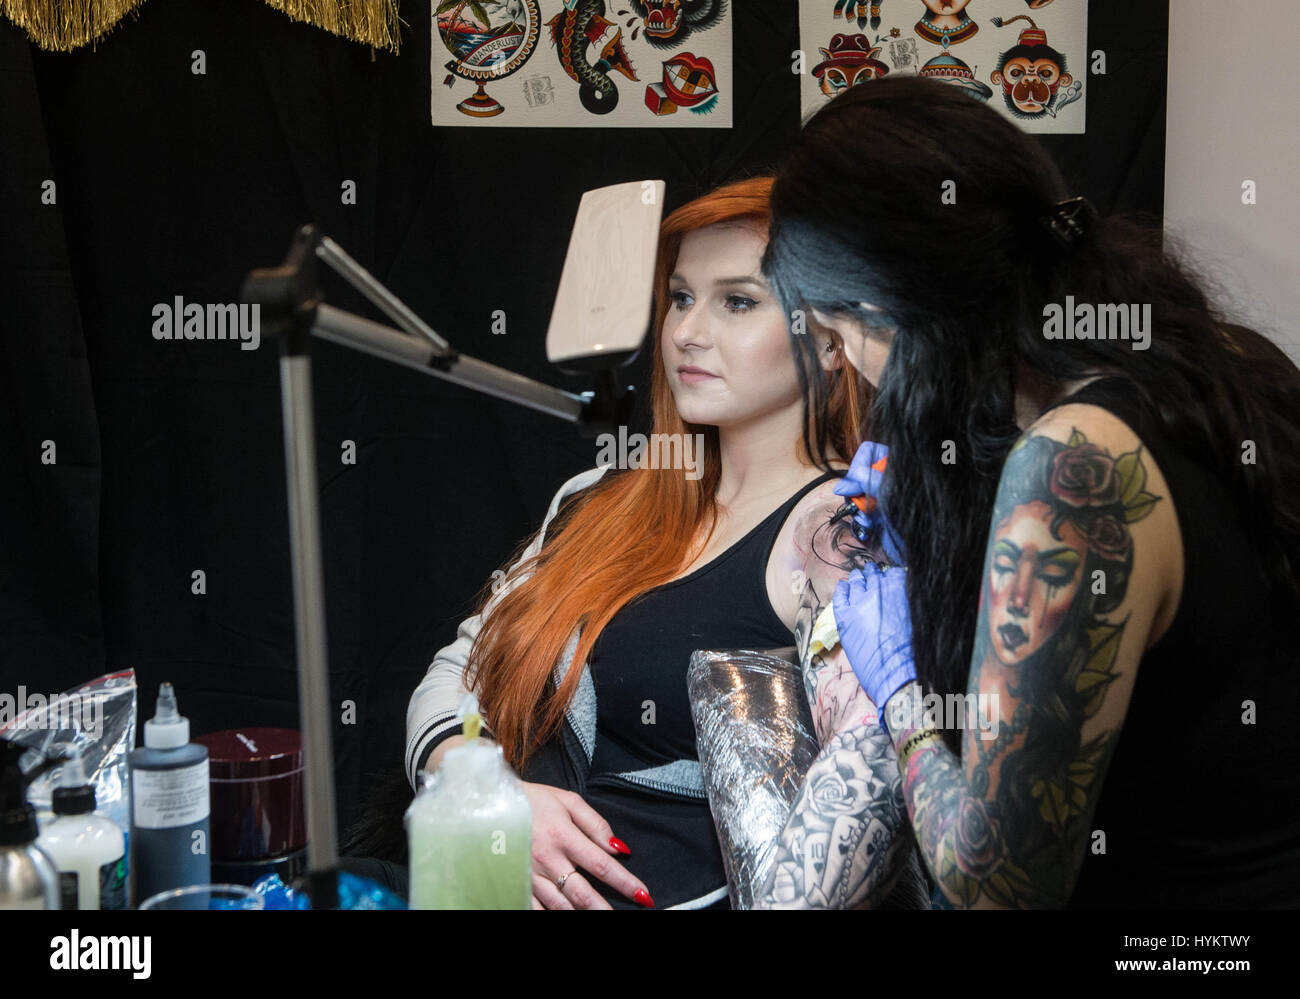 Poznan, Poland: INKED IN men with full body tattoos to ladies having their most intimate parts decorated this tattoo convention is a body art lover’s paradise. Pictures show how guests at the Poznan Tattoo Convention, Poland enjoyed becoming part of the show – by allowing the 300 exhibiting tattoo artists to ink their bodies. The convention runs this weekend from March 19th to 20th. Stock Photo